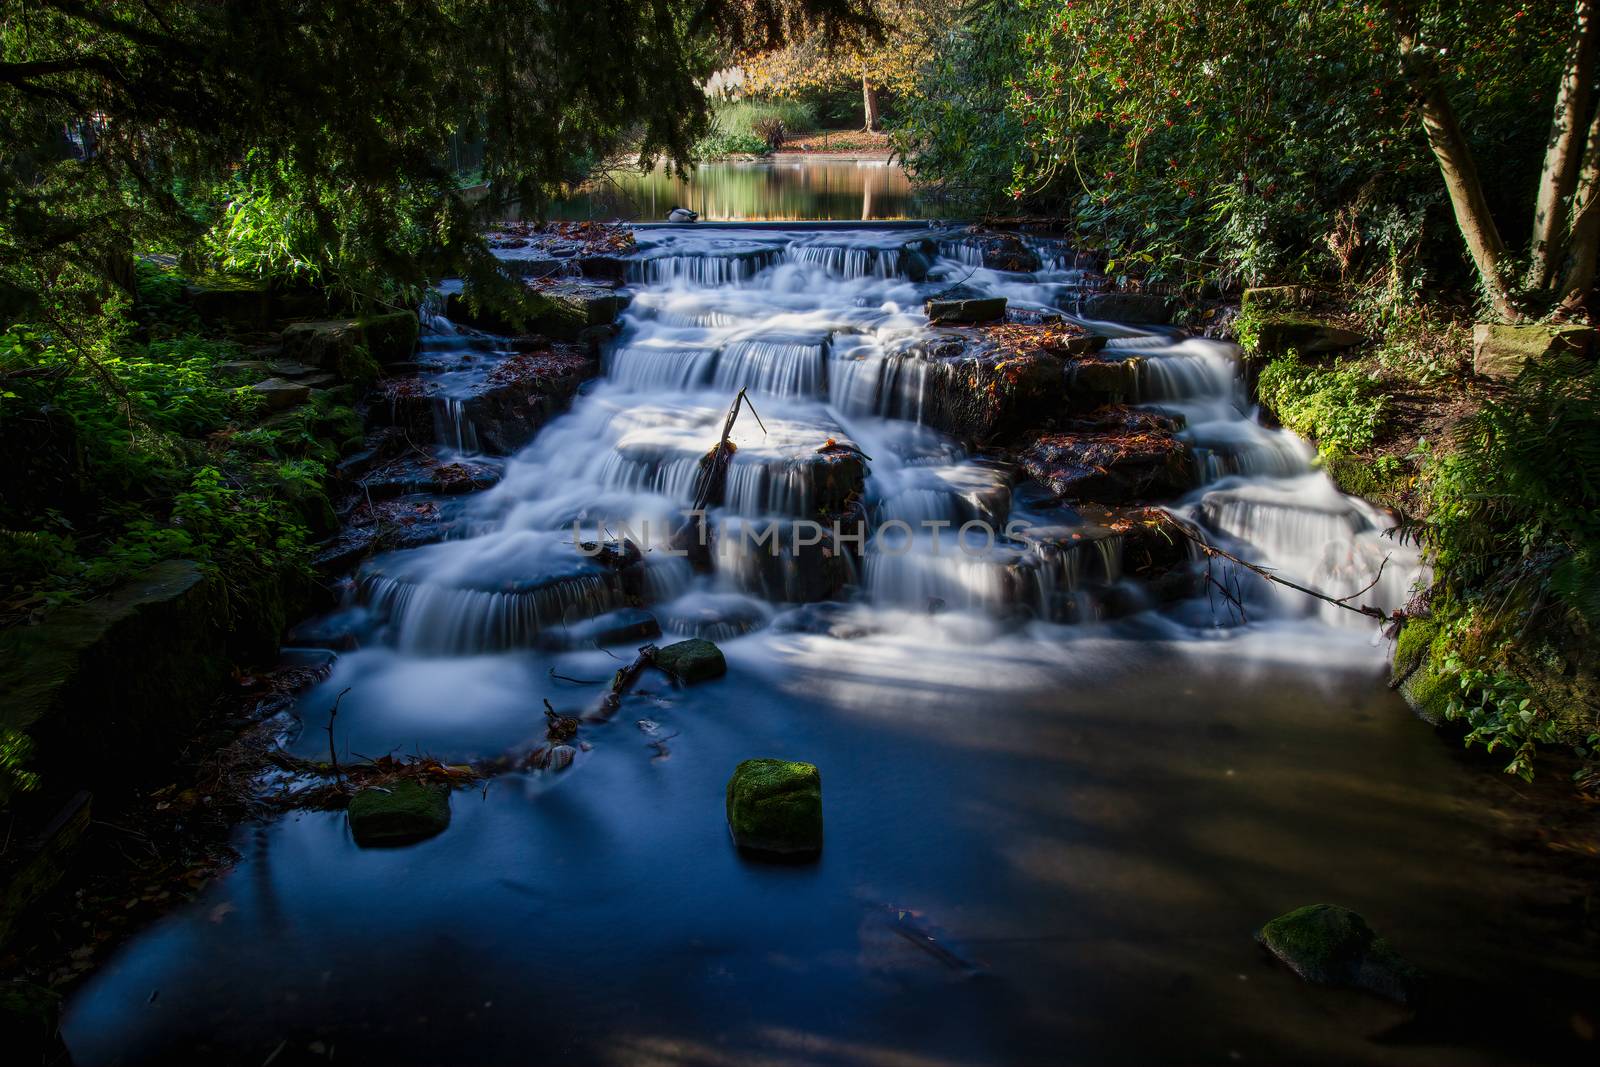 Long exposure of Carshalton Ponds Waterfall by magicbones